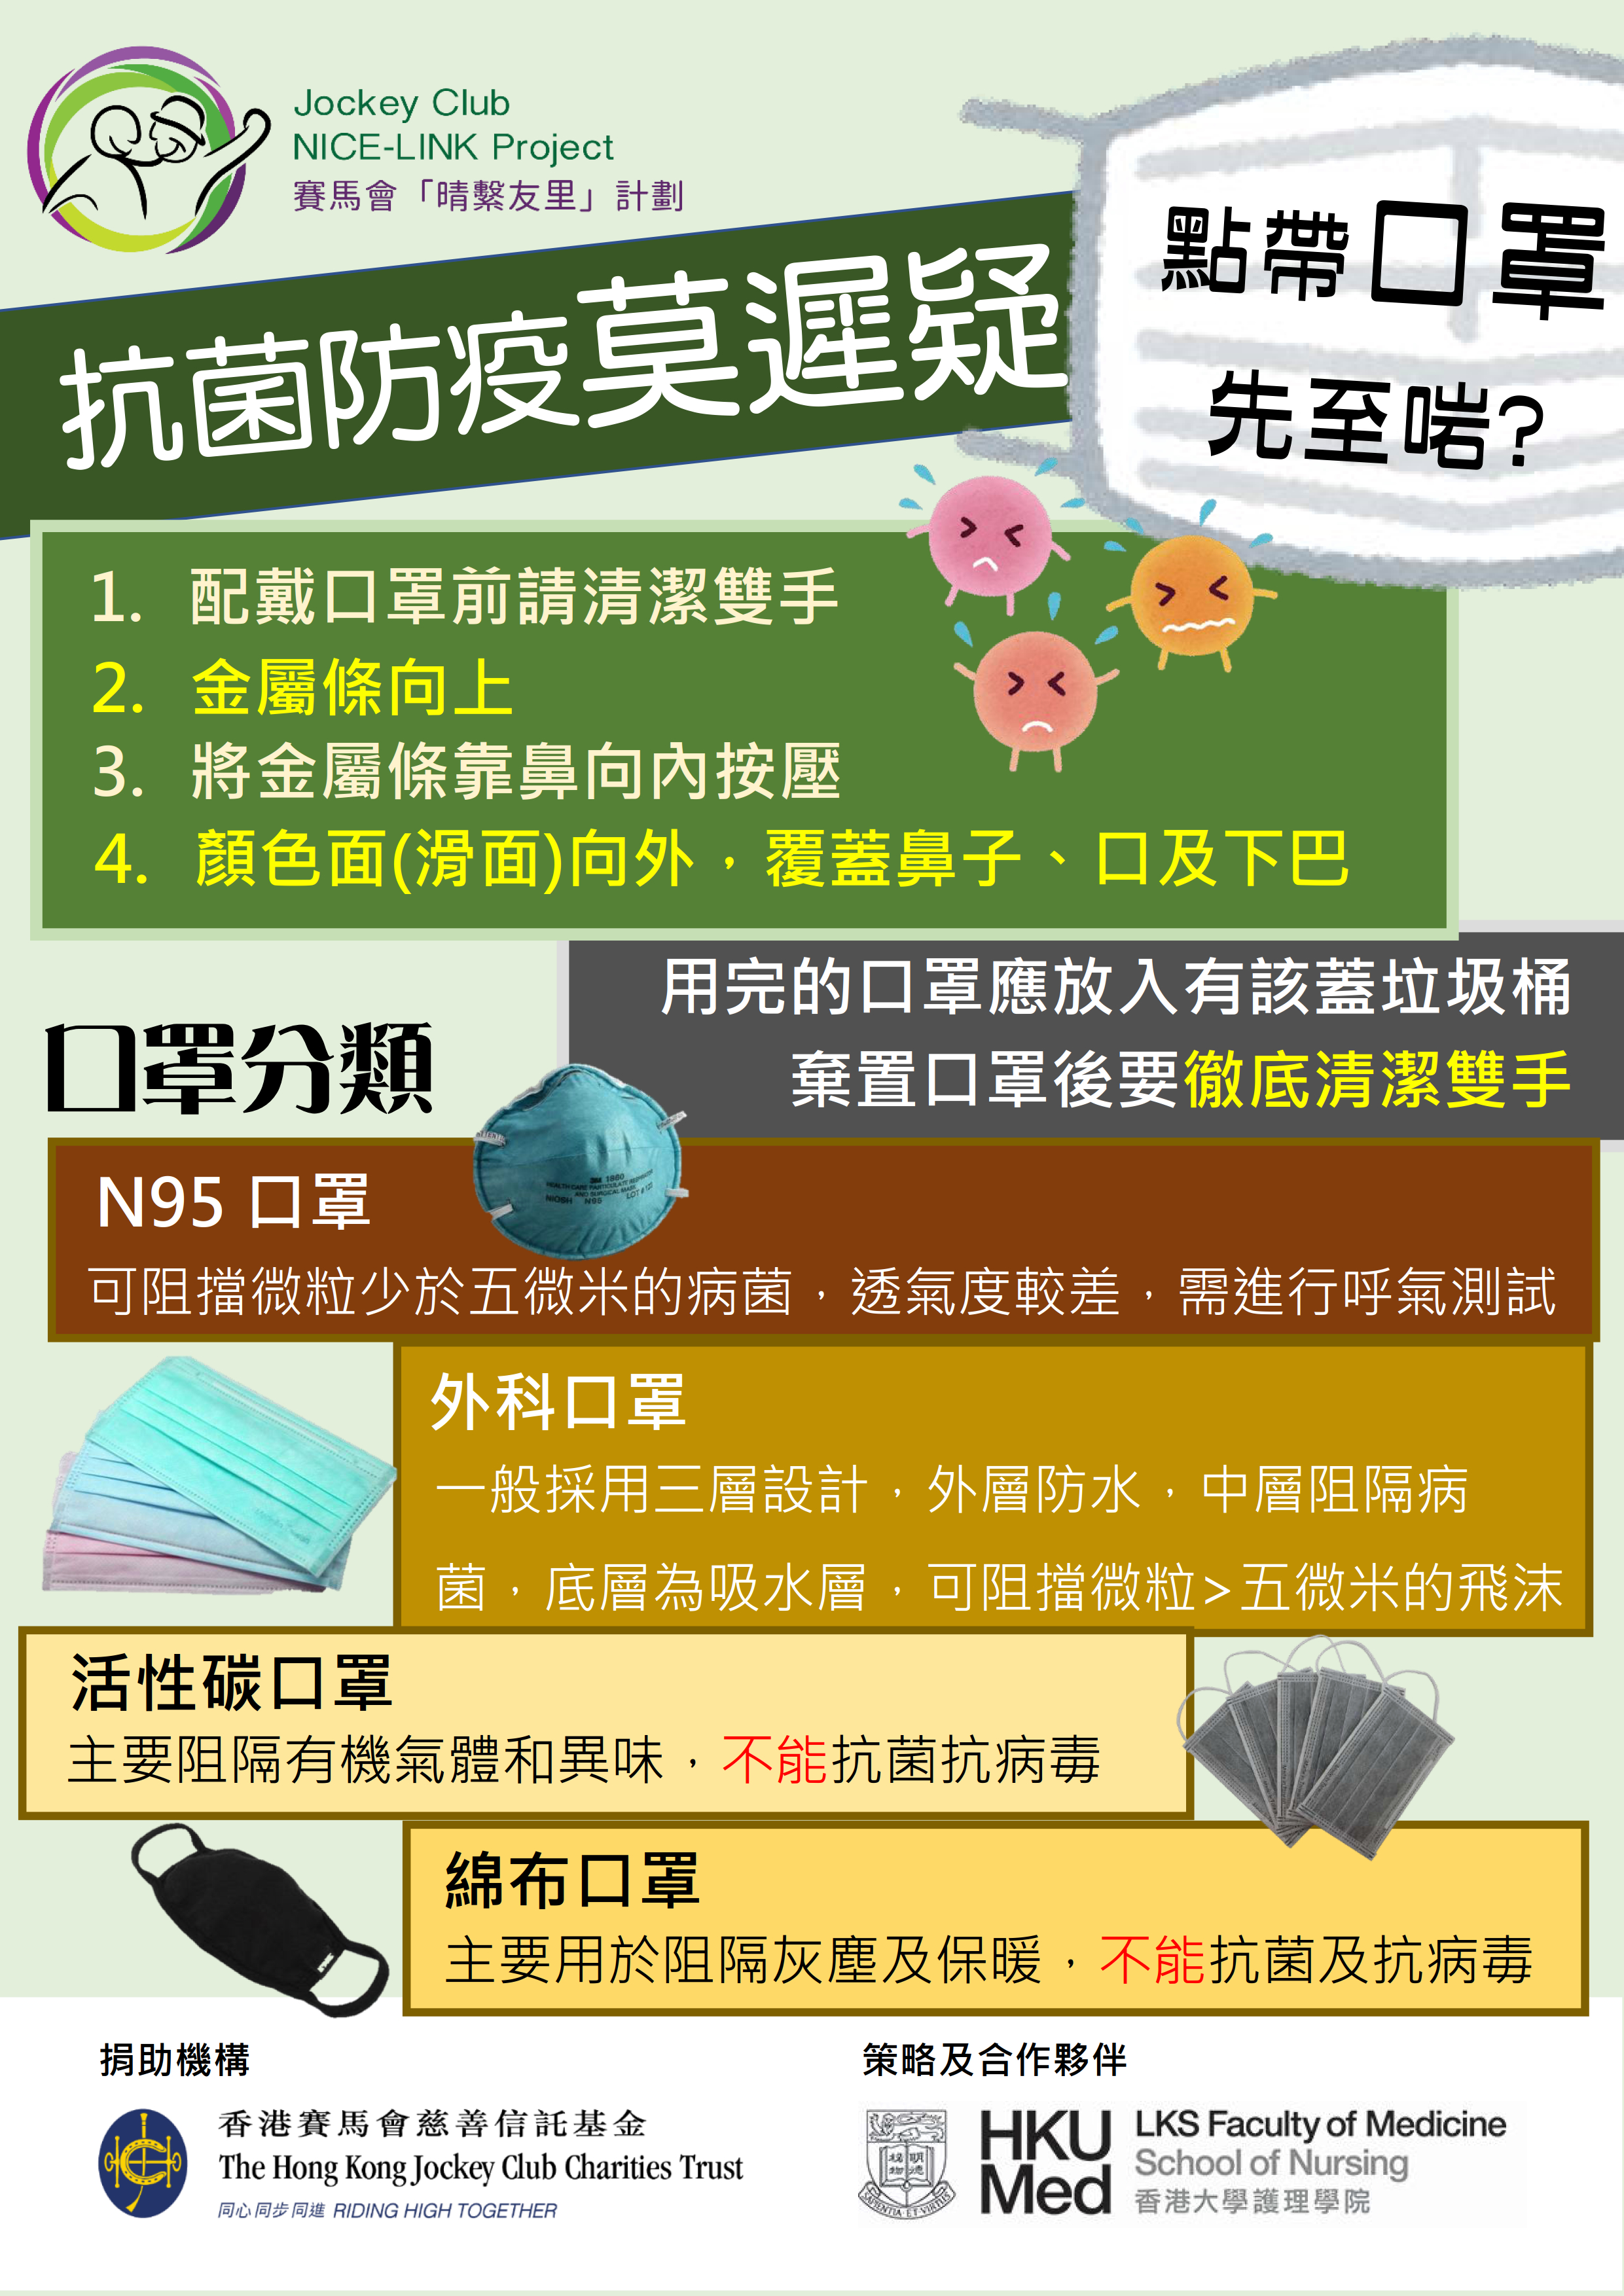 【Hong Kong Jockey Club Nice-Link (HKJC-NICE-LINK) Project – Nurse-led Tele-care Support to the Socially Isolated Older Adults】